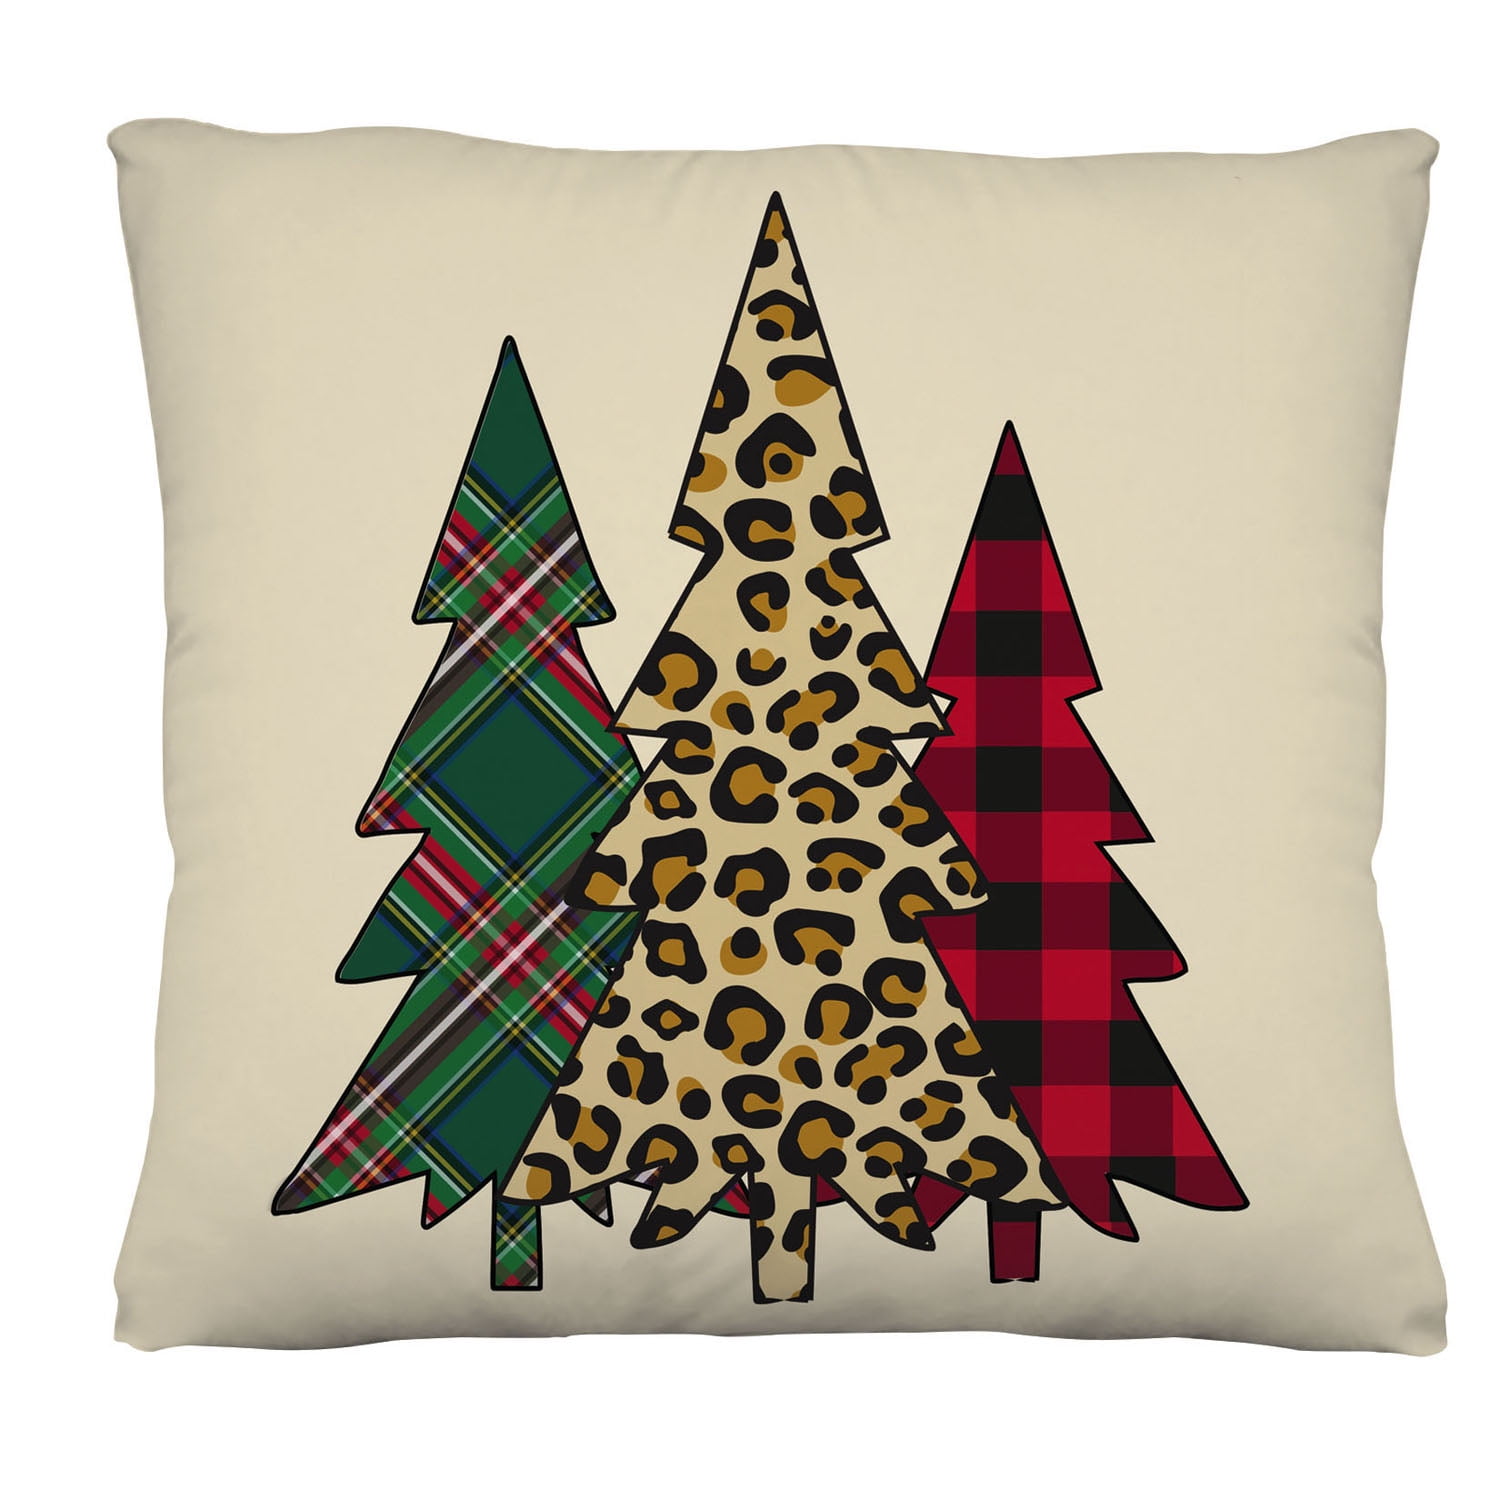 Multicolor Christmas Trees Gifts and Decor Co Christmas Trees Throw Pillow 18x18 